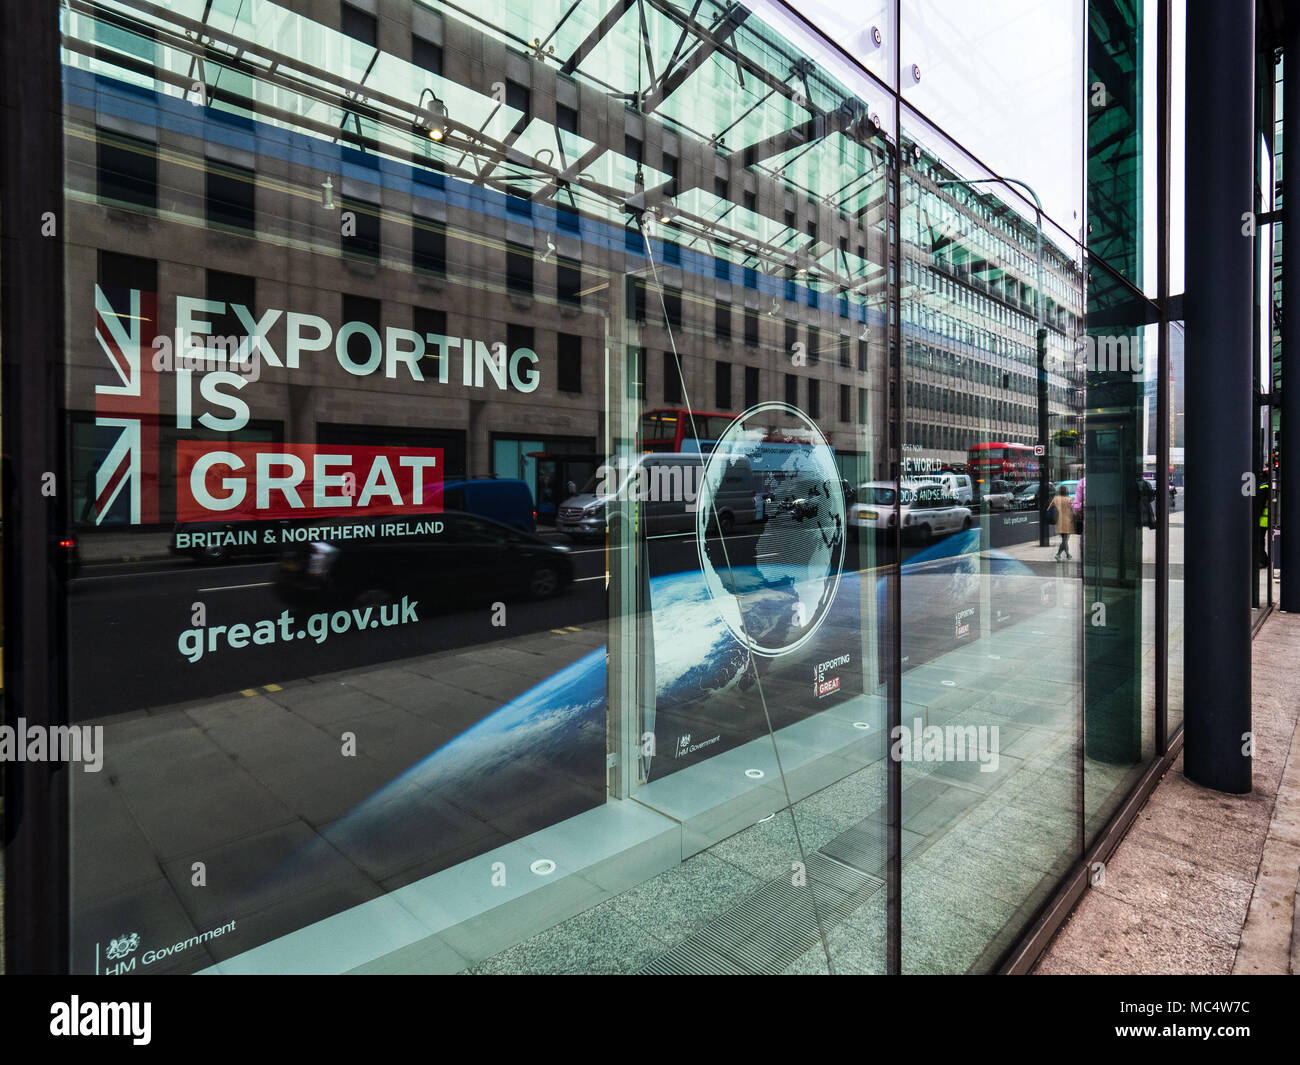 Department for Business, Energy and Industrial Strategy, London - Exporting is Great campaign display in the windows of the Department offices Stock Photo